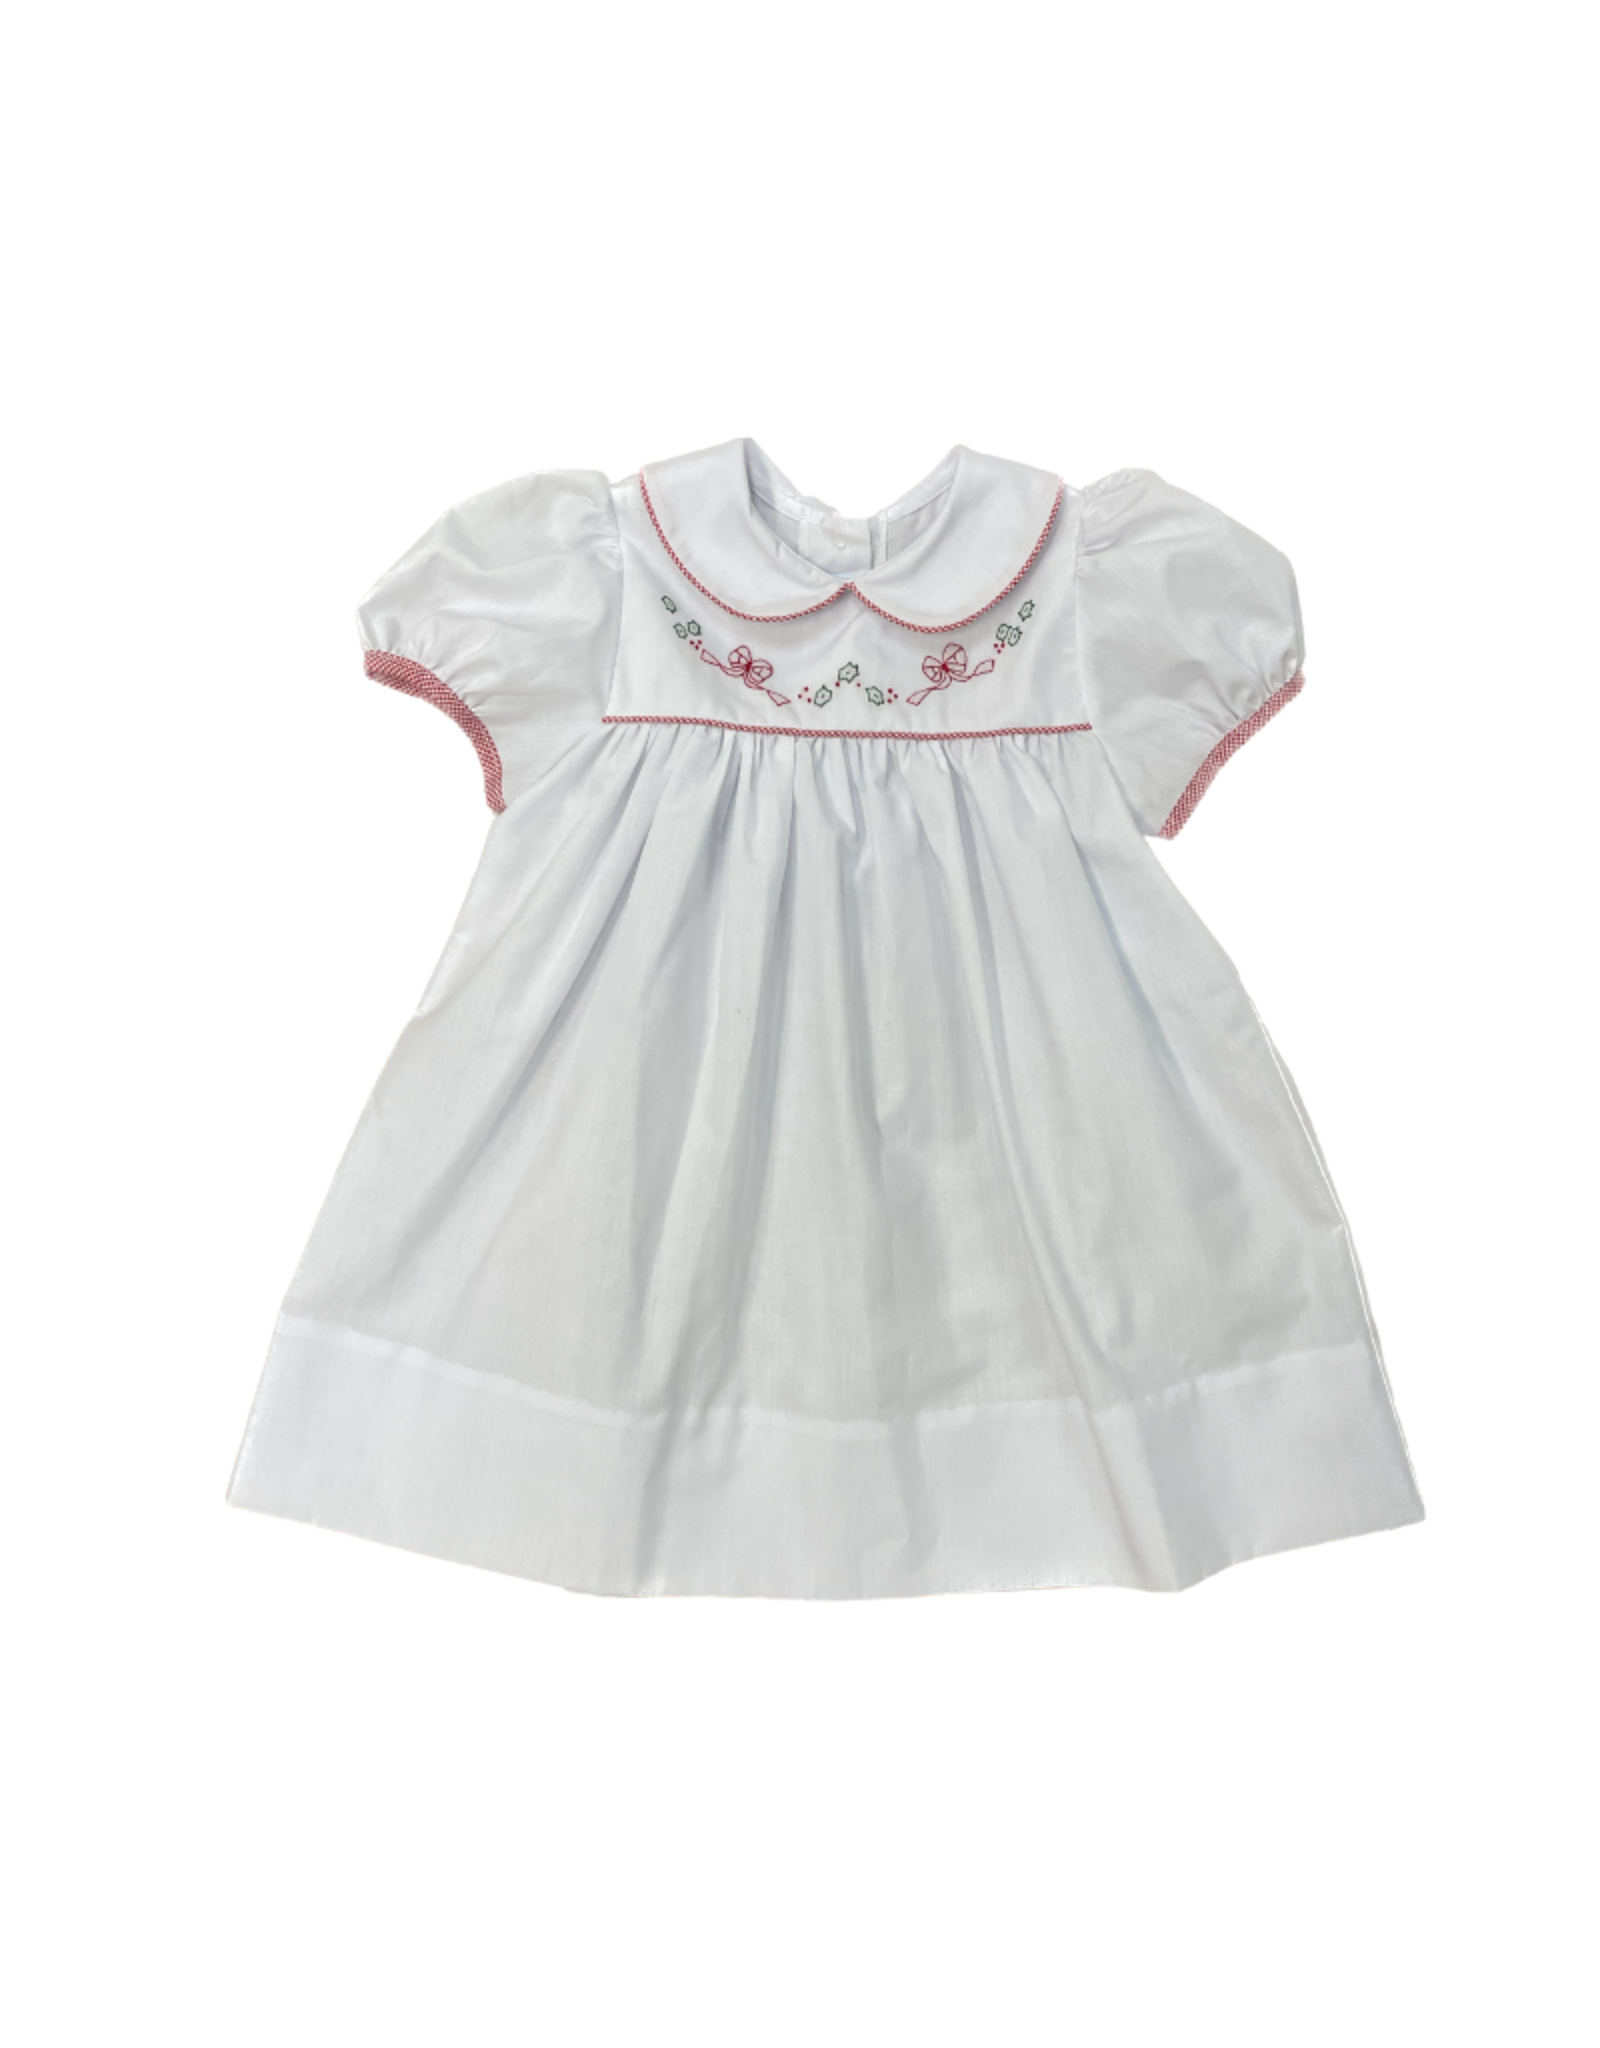 Auraluz White Bow and Holly Christmas Dress